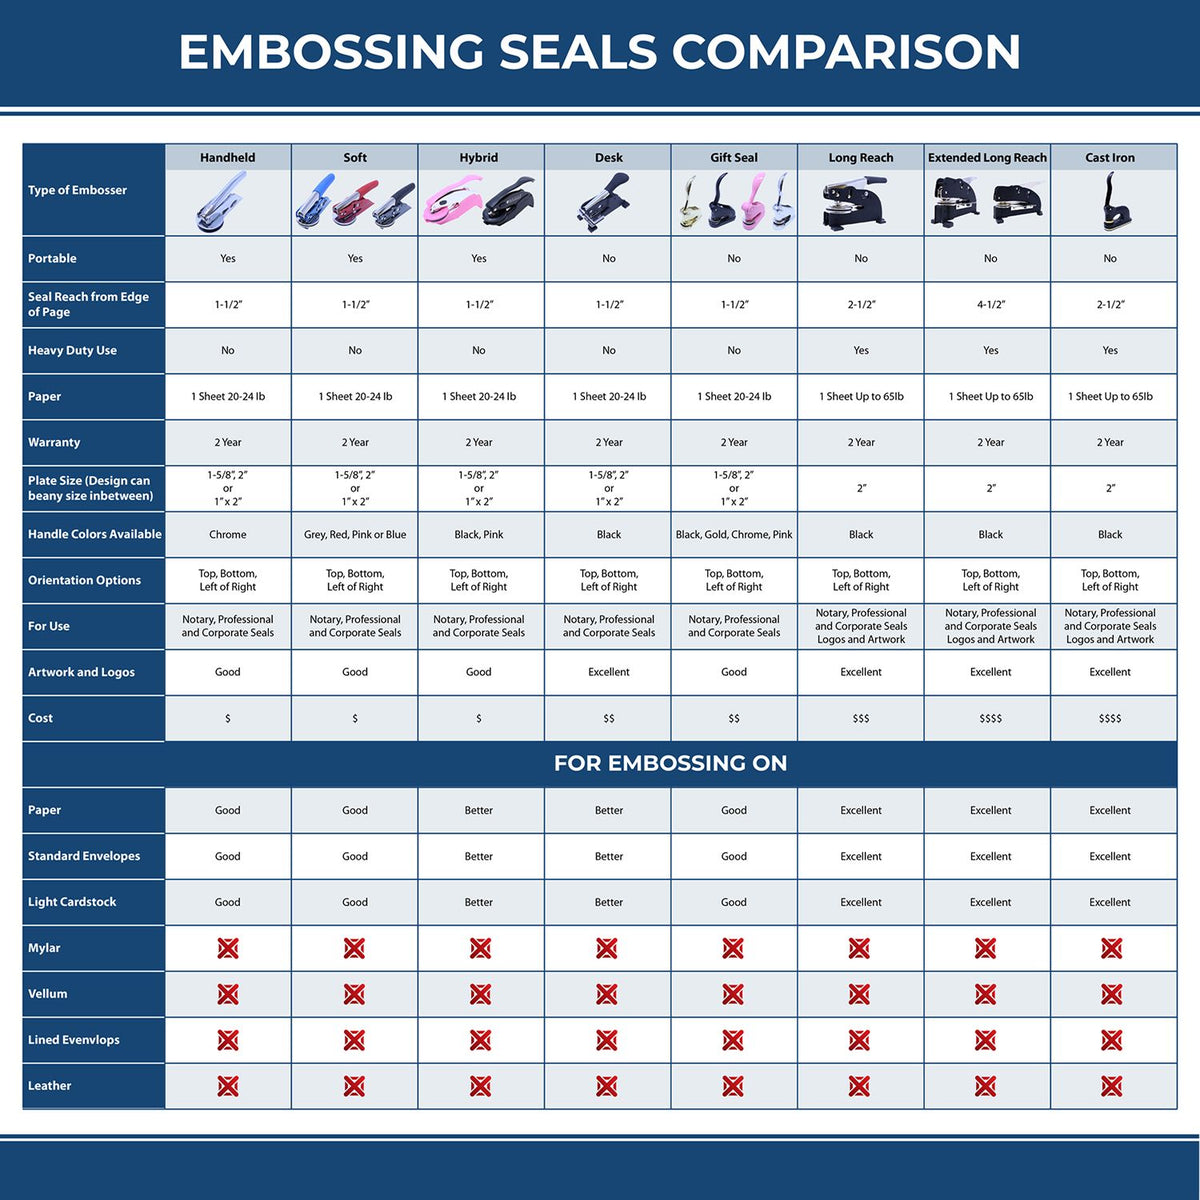 A comparison chart for the different types of mount models available for the Hybrid Connecticut Engineer Seal